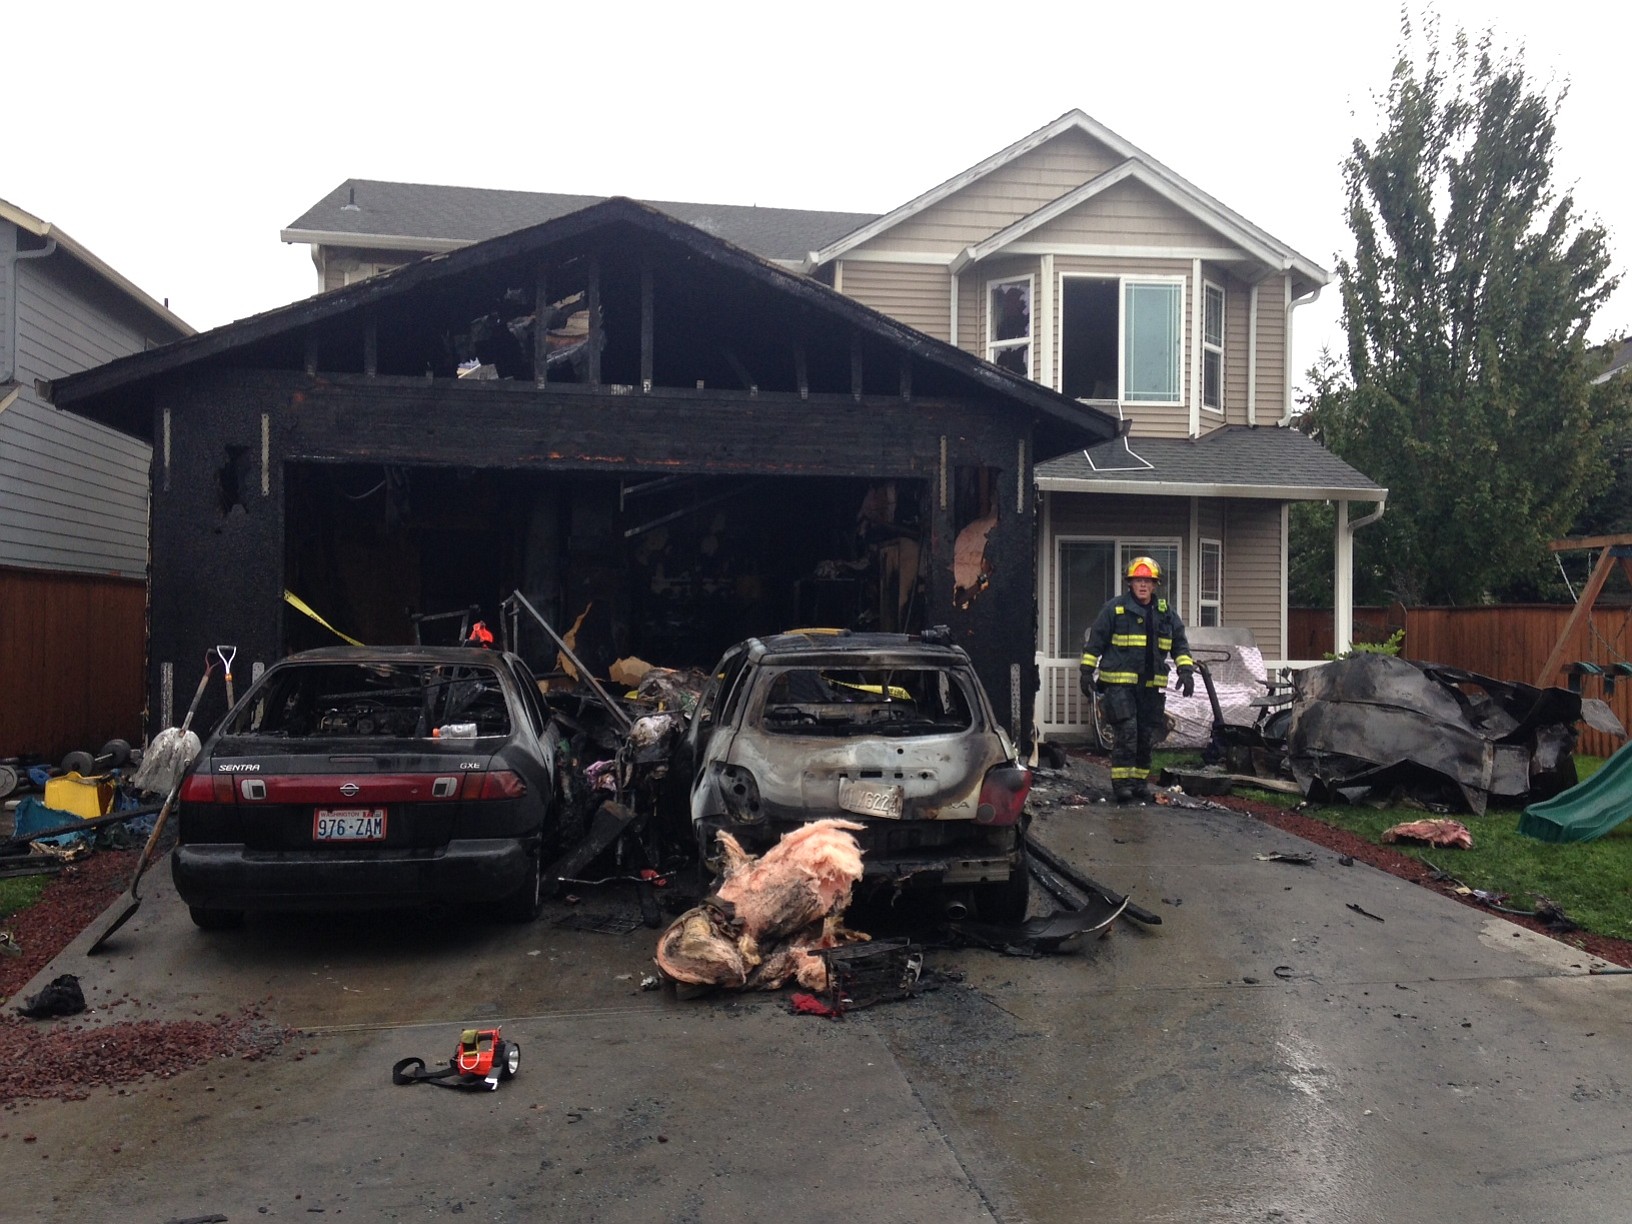 The Vancouver Fire Department battled a two-alarm fire that started in the garage and spread to the second story of the North Image house early Tuesday morning.